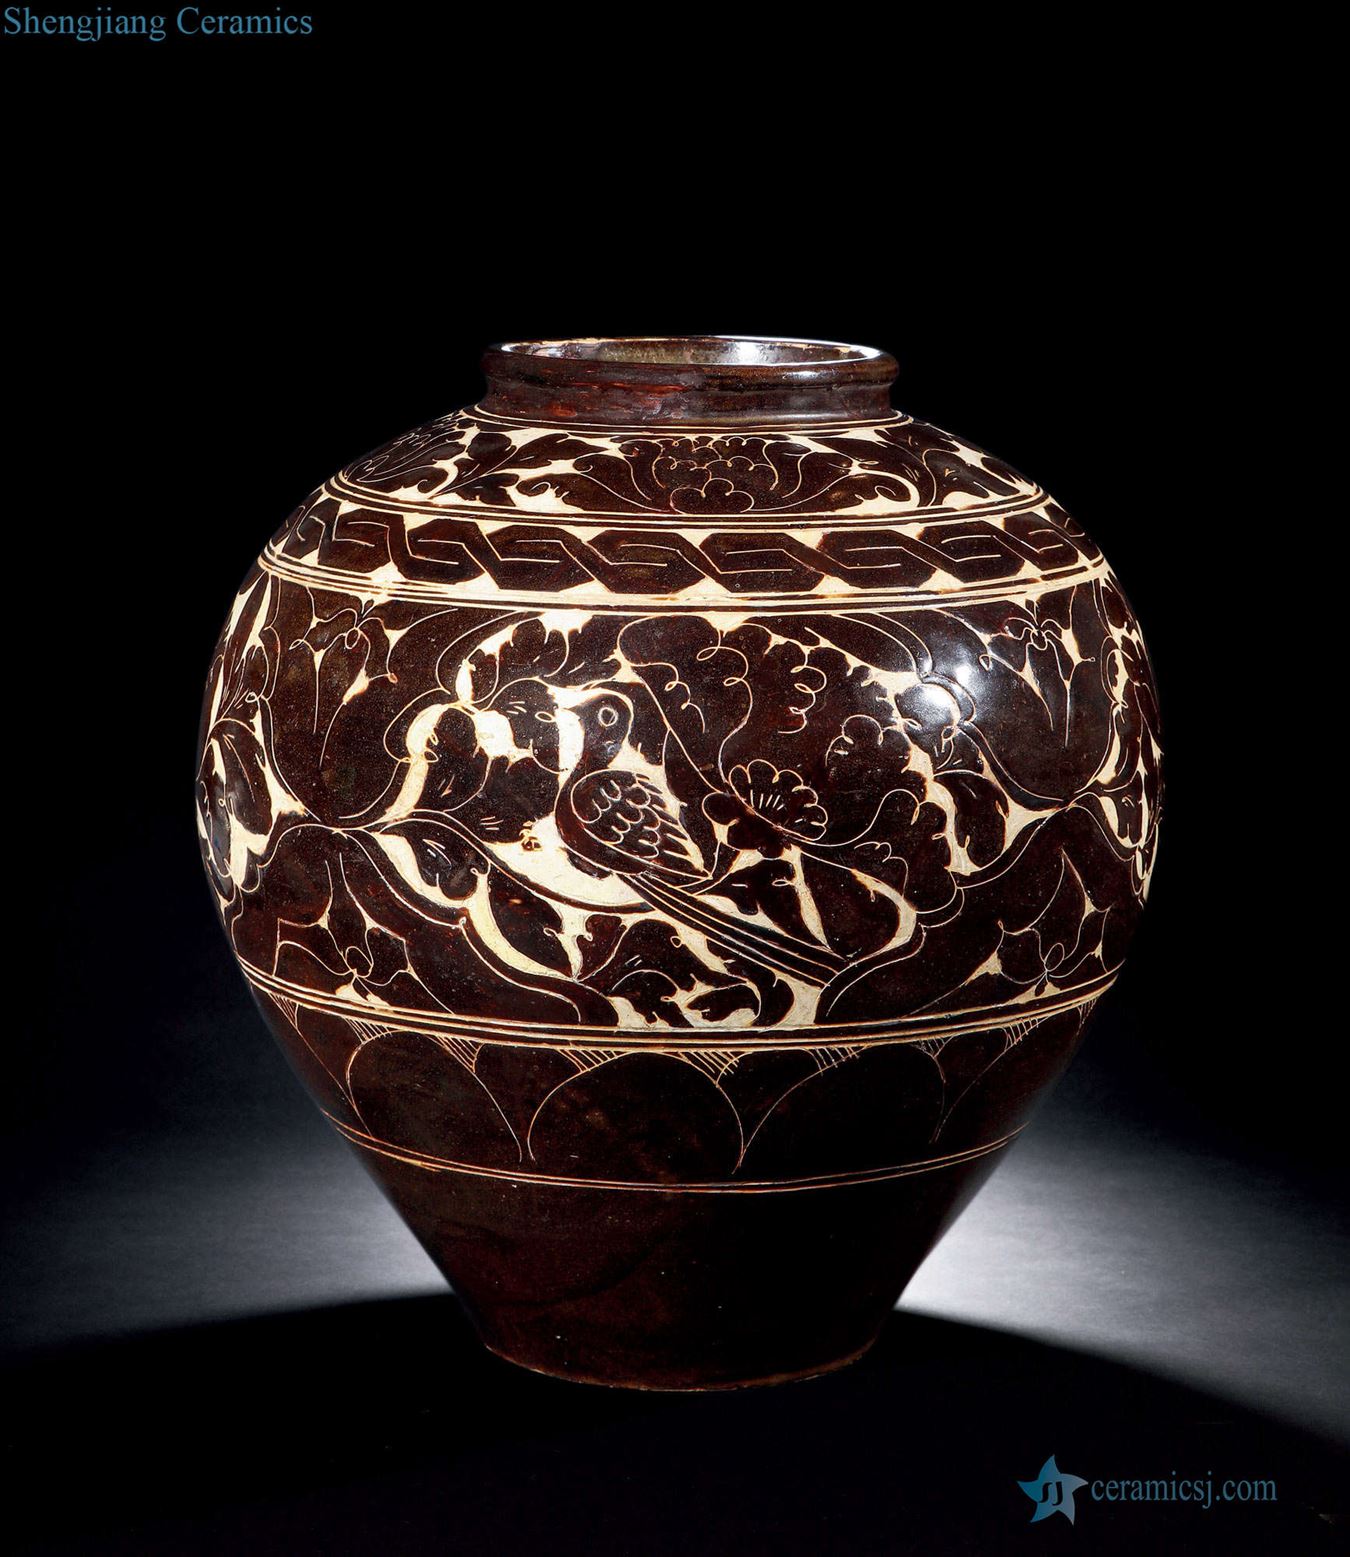 Liao magnetic state kiln carved flower pot